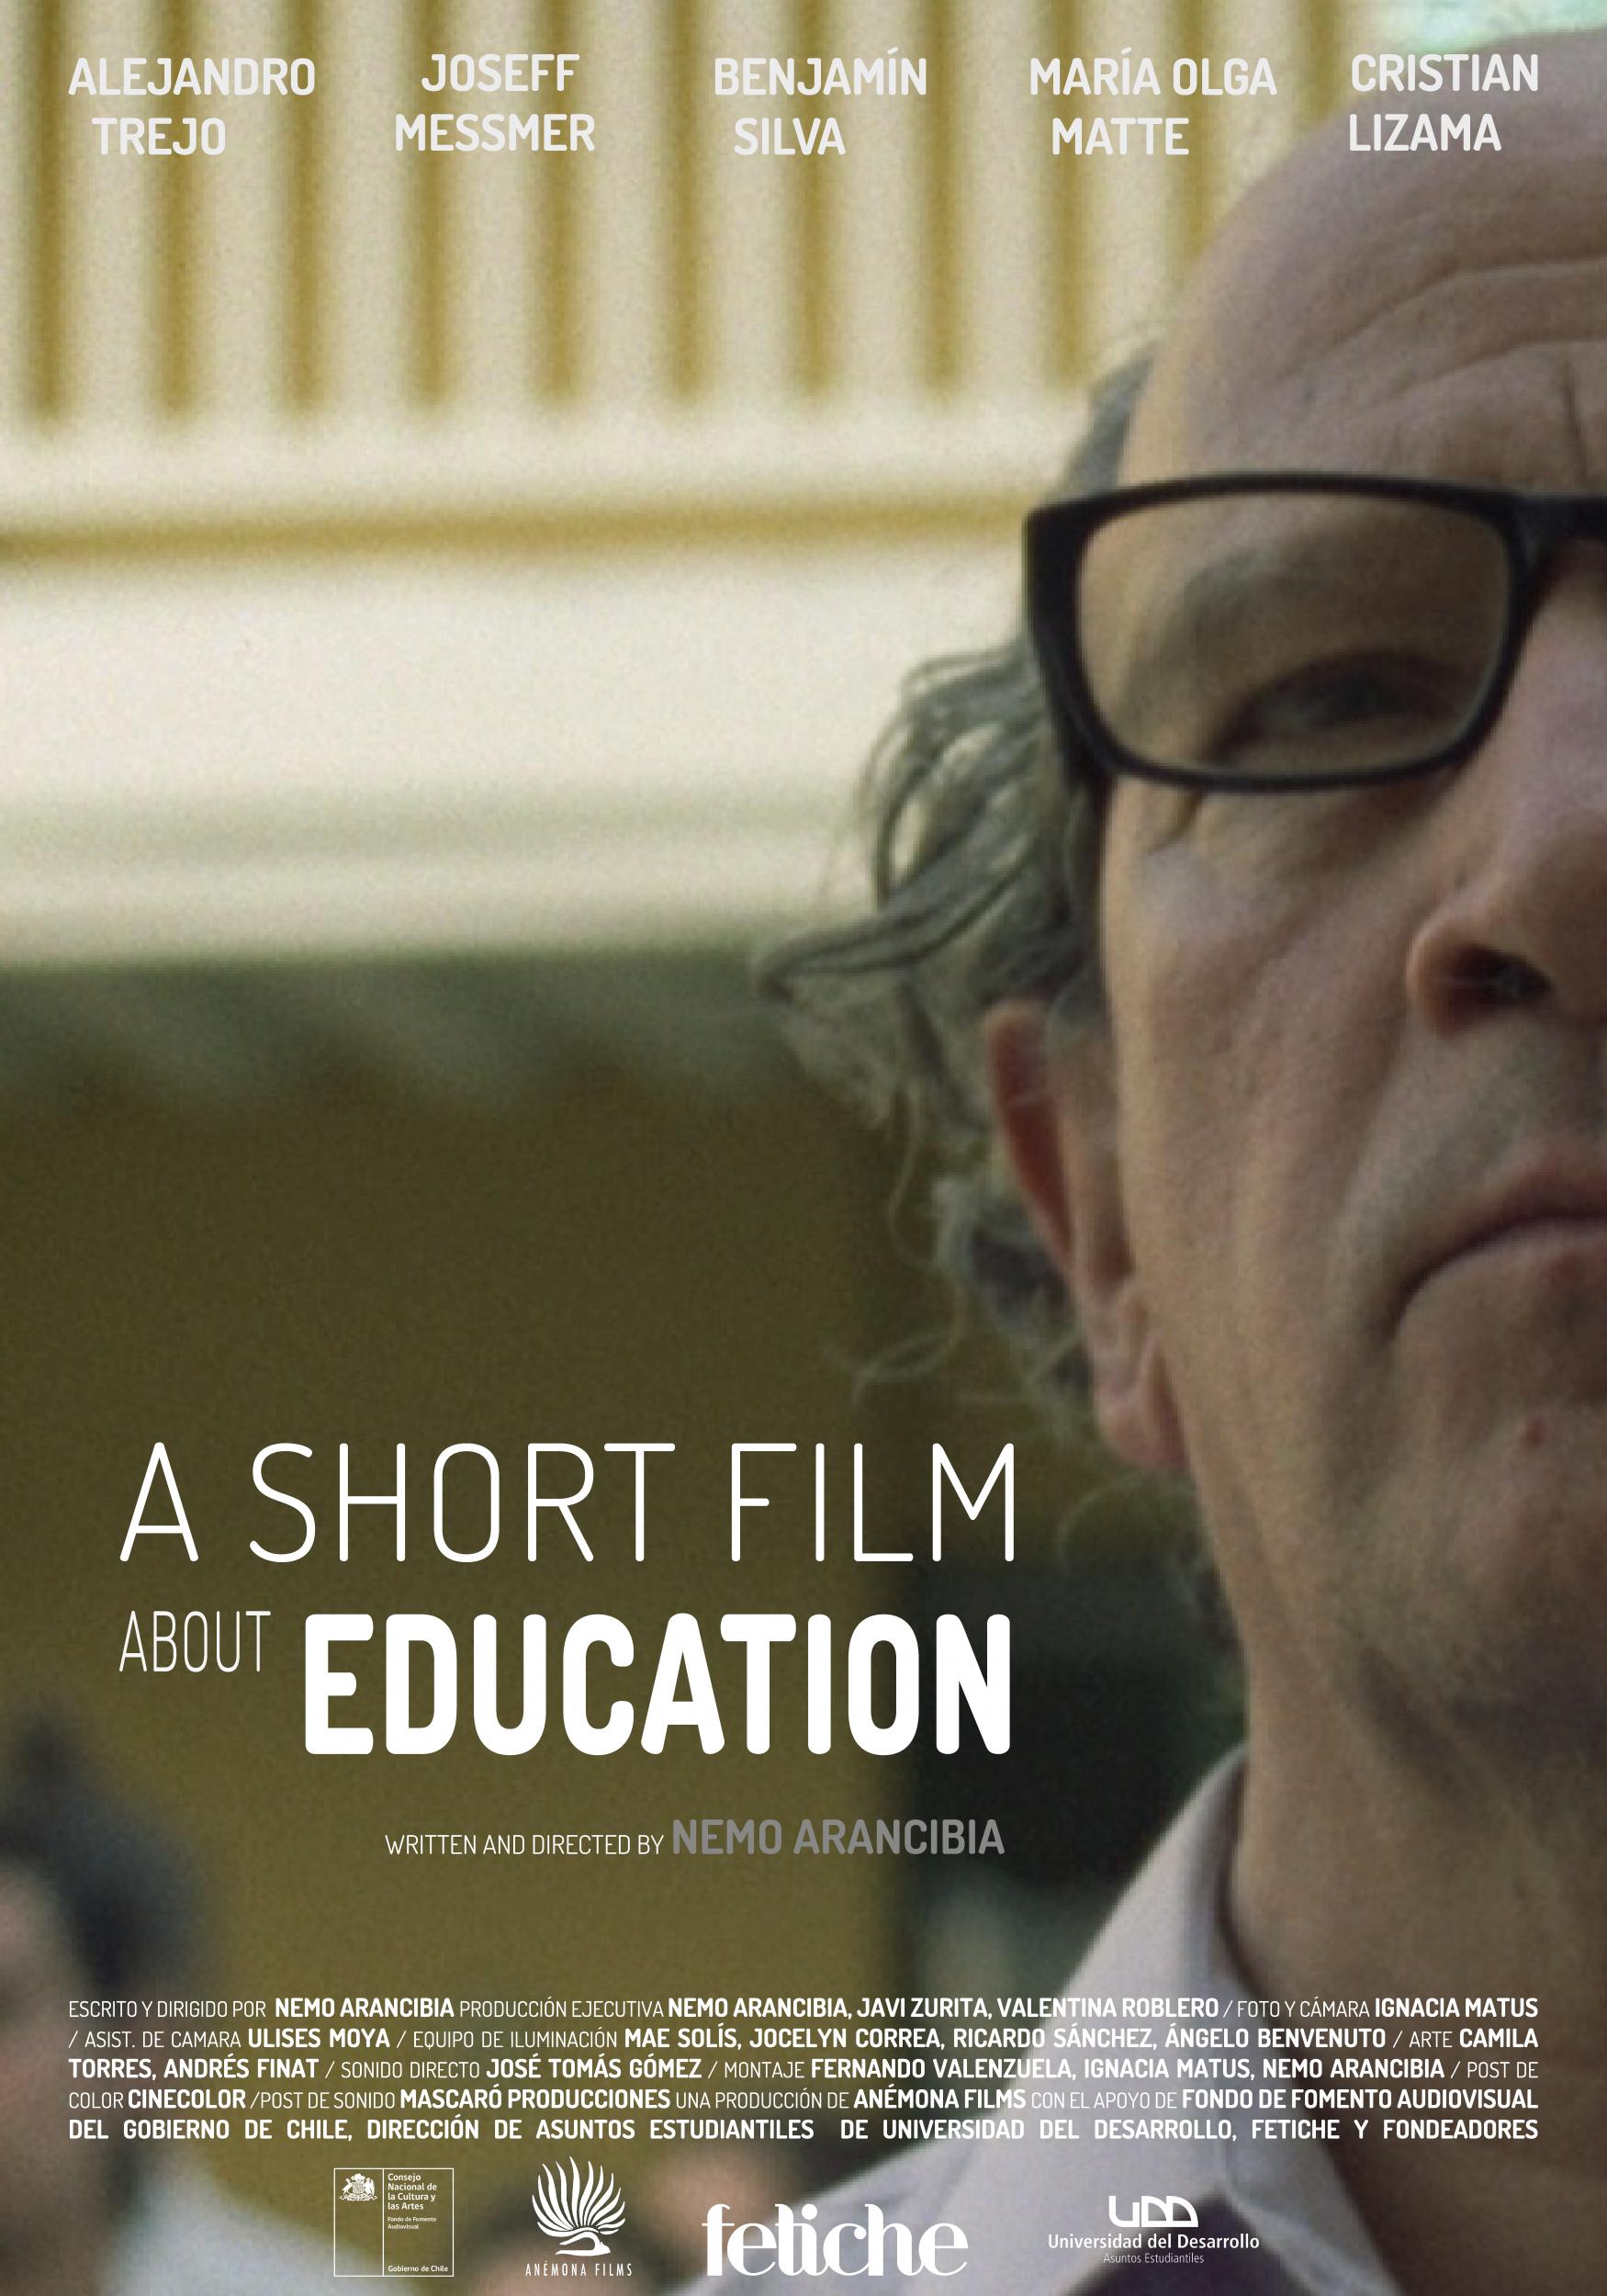 film review of education